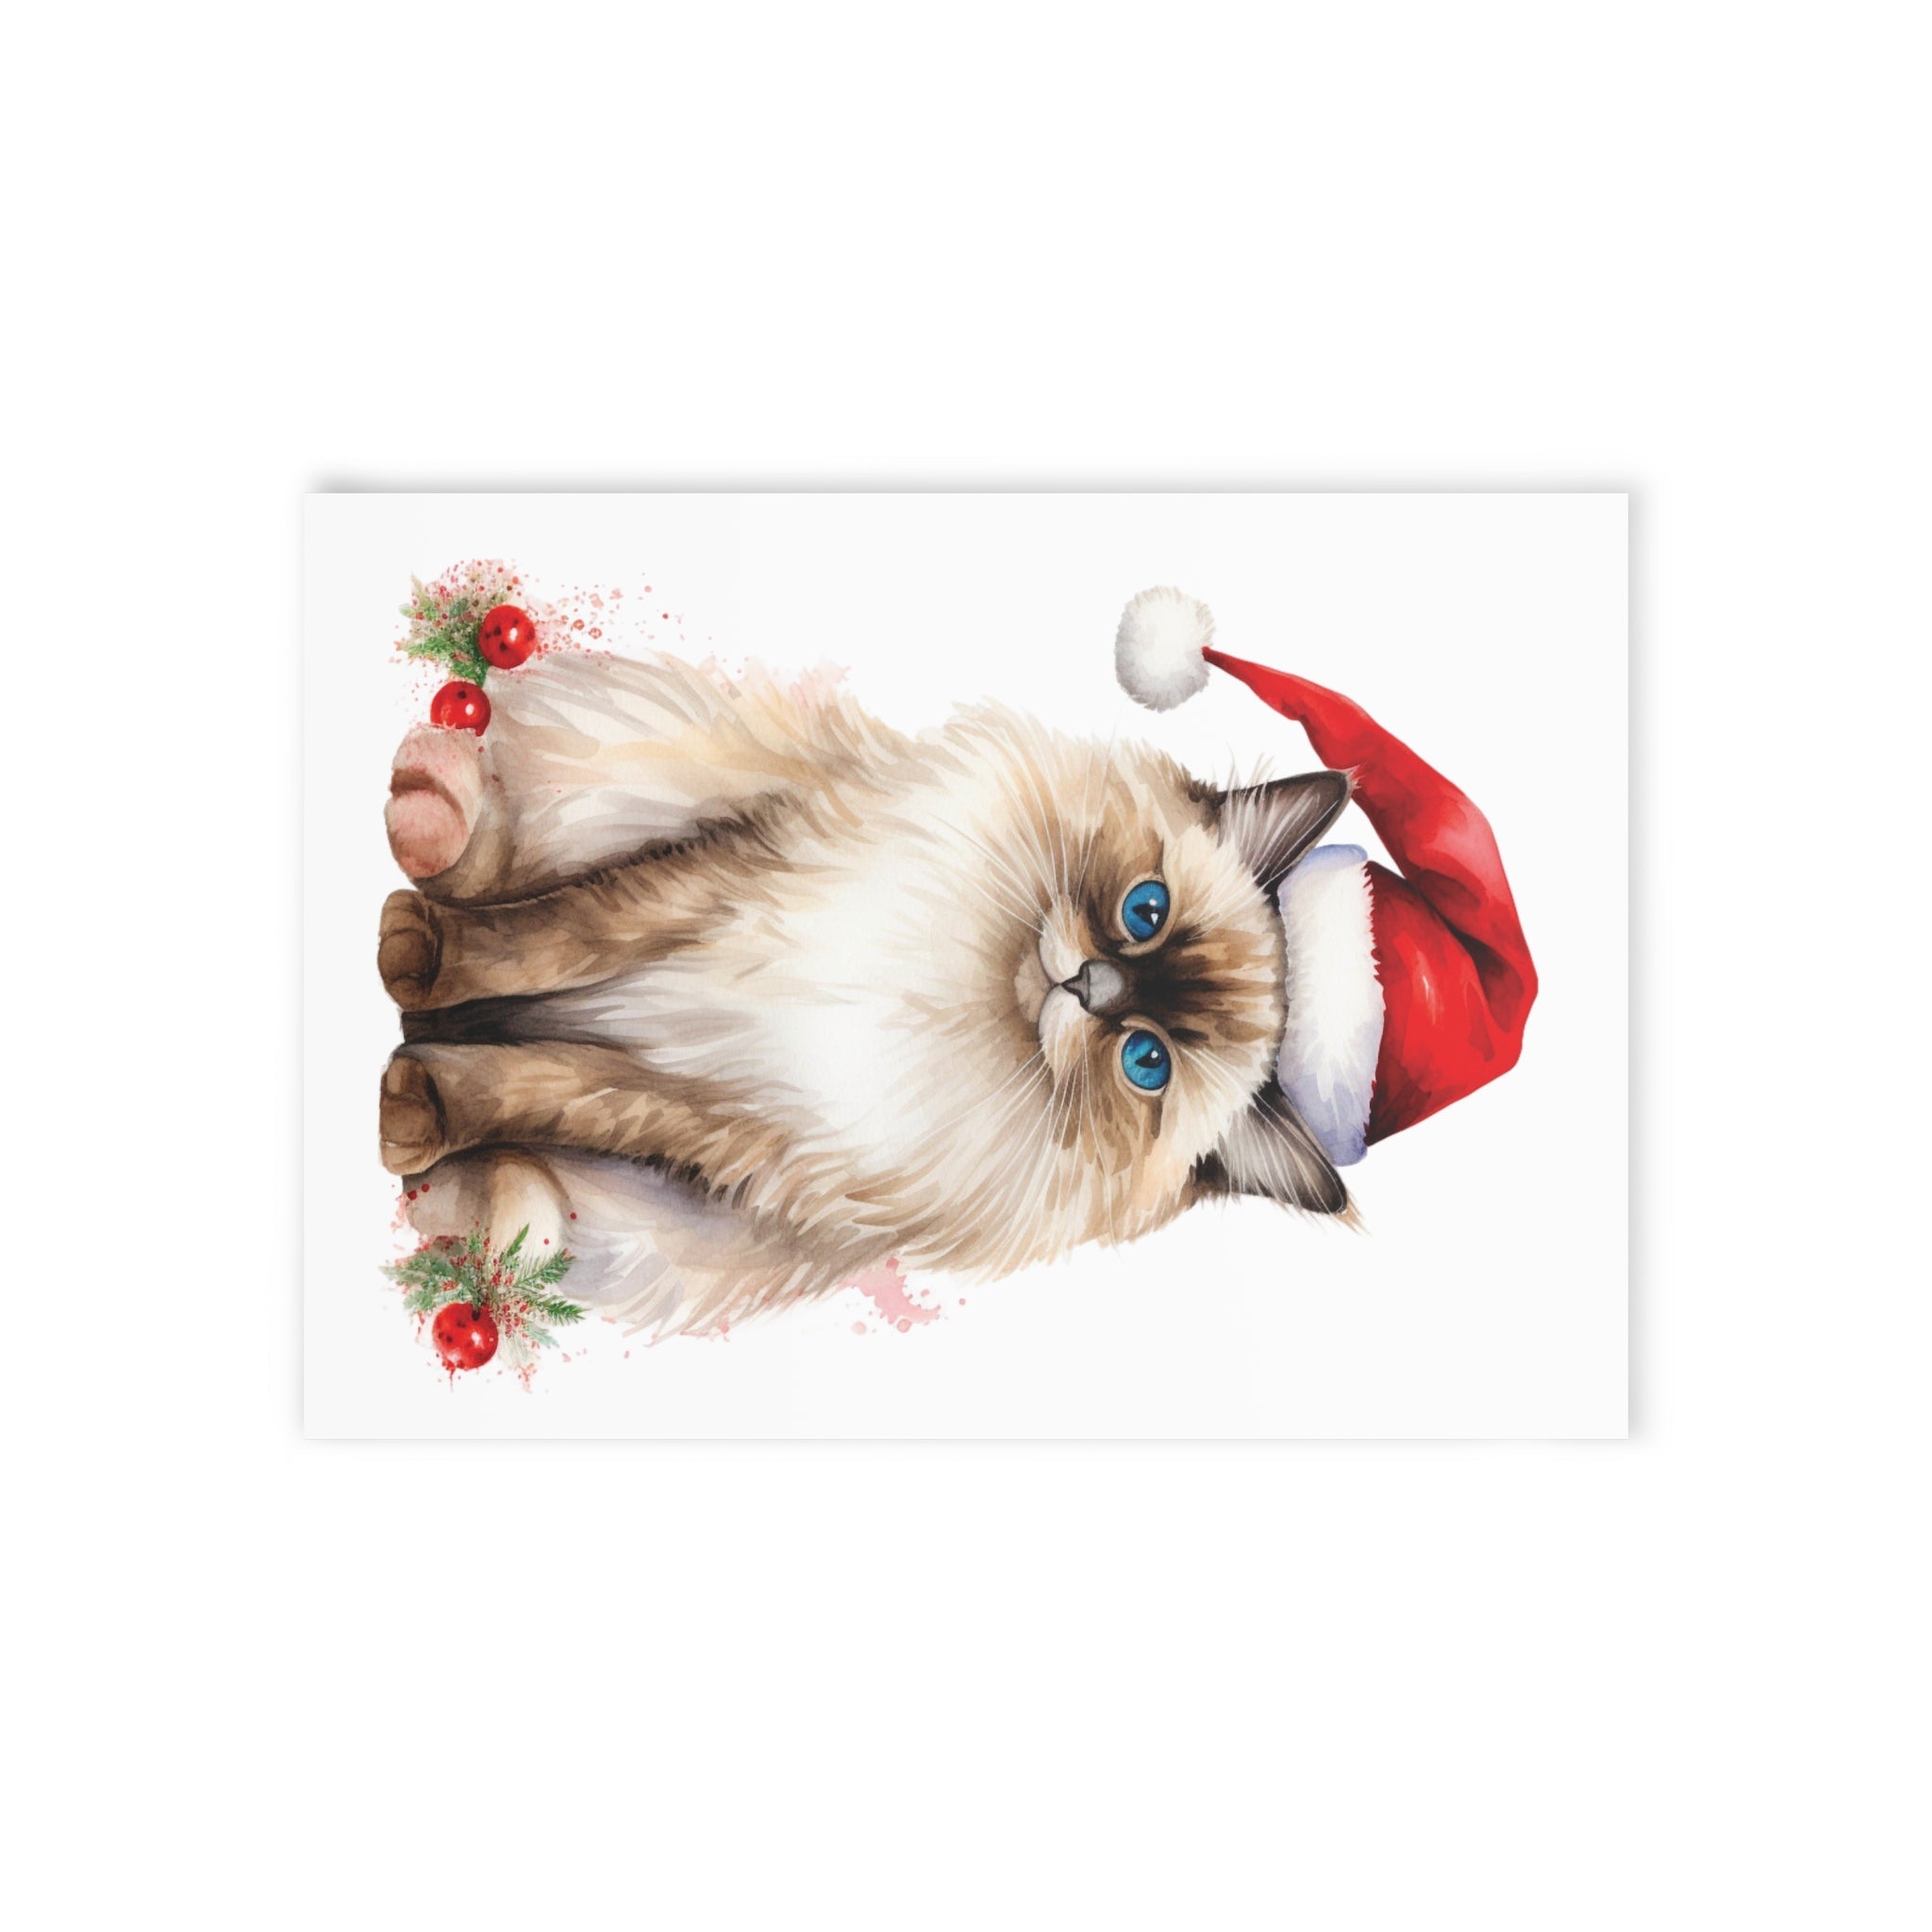 Birman, Christmas Cat - One-Sided Greeting Card/Art Print with Envelope, 300gsm FSC-Certified